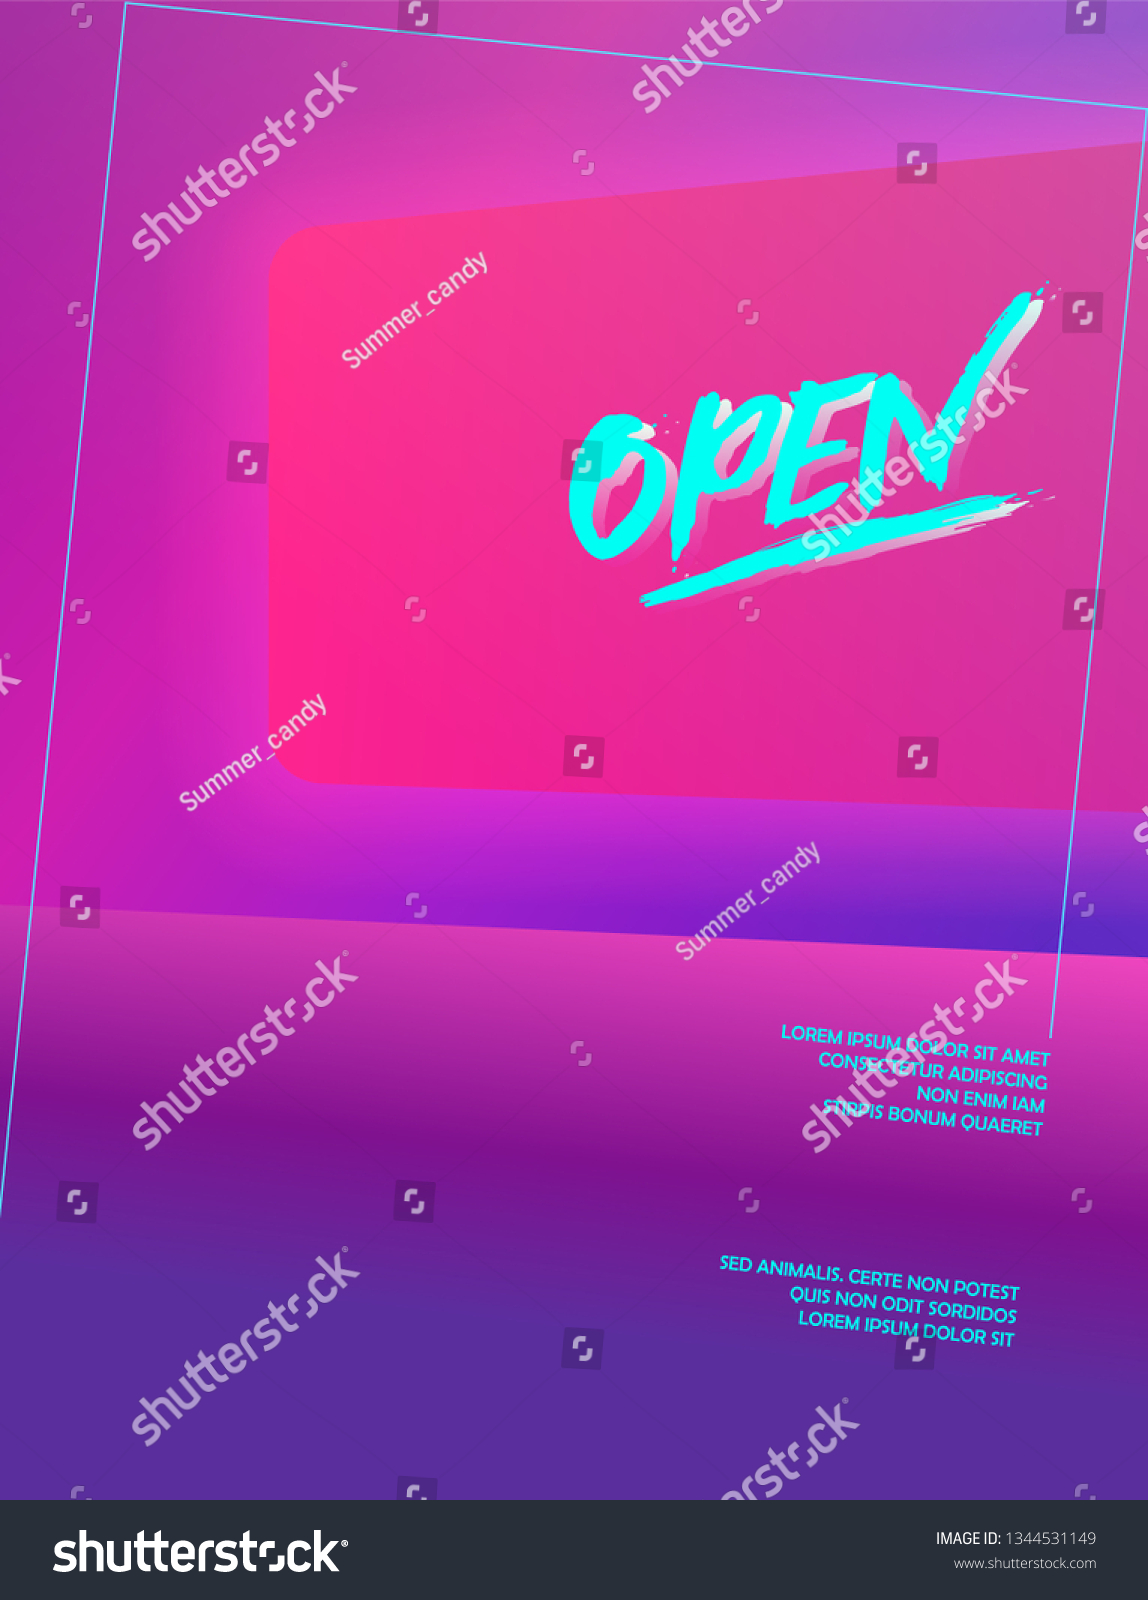 Neon Glow Ambient Room Neon Text Stock Vector Royalty Free